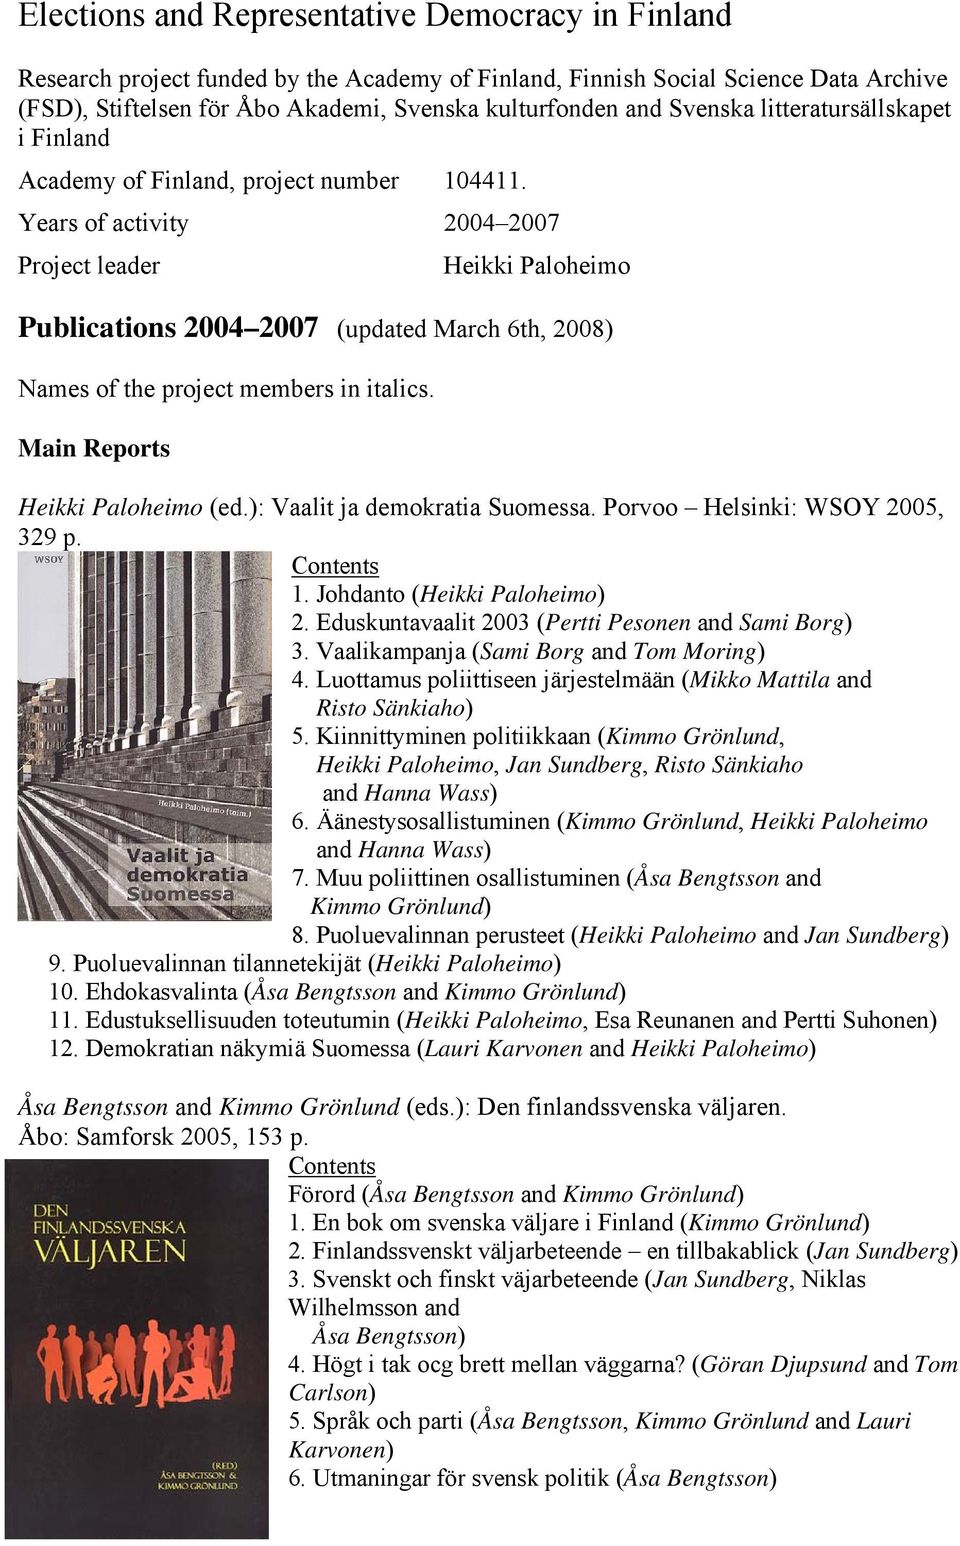 Years of activity 2004 2007 Project leader Heikki Paloheimo Publications 2004 2007 (updated March 6th, 2008) Names of the project members in italics. Main Reports Heikki Paloheimo (ed.